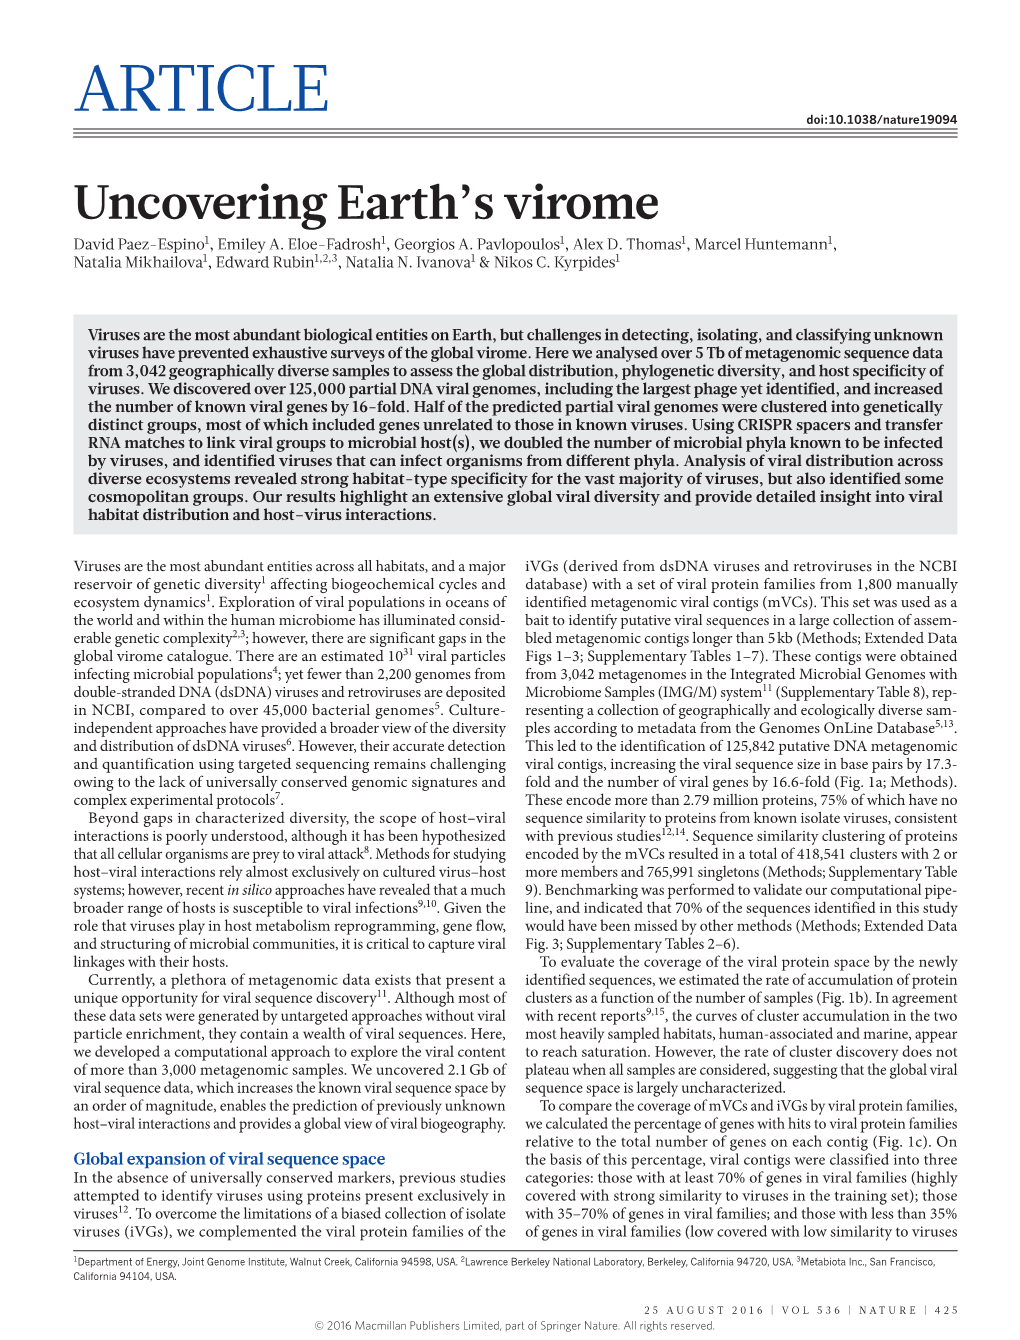 Uncovering Earth's Virome